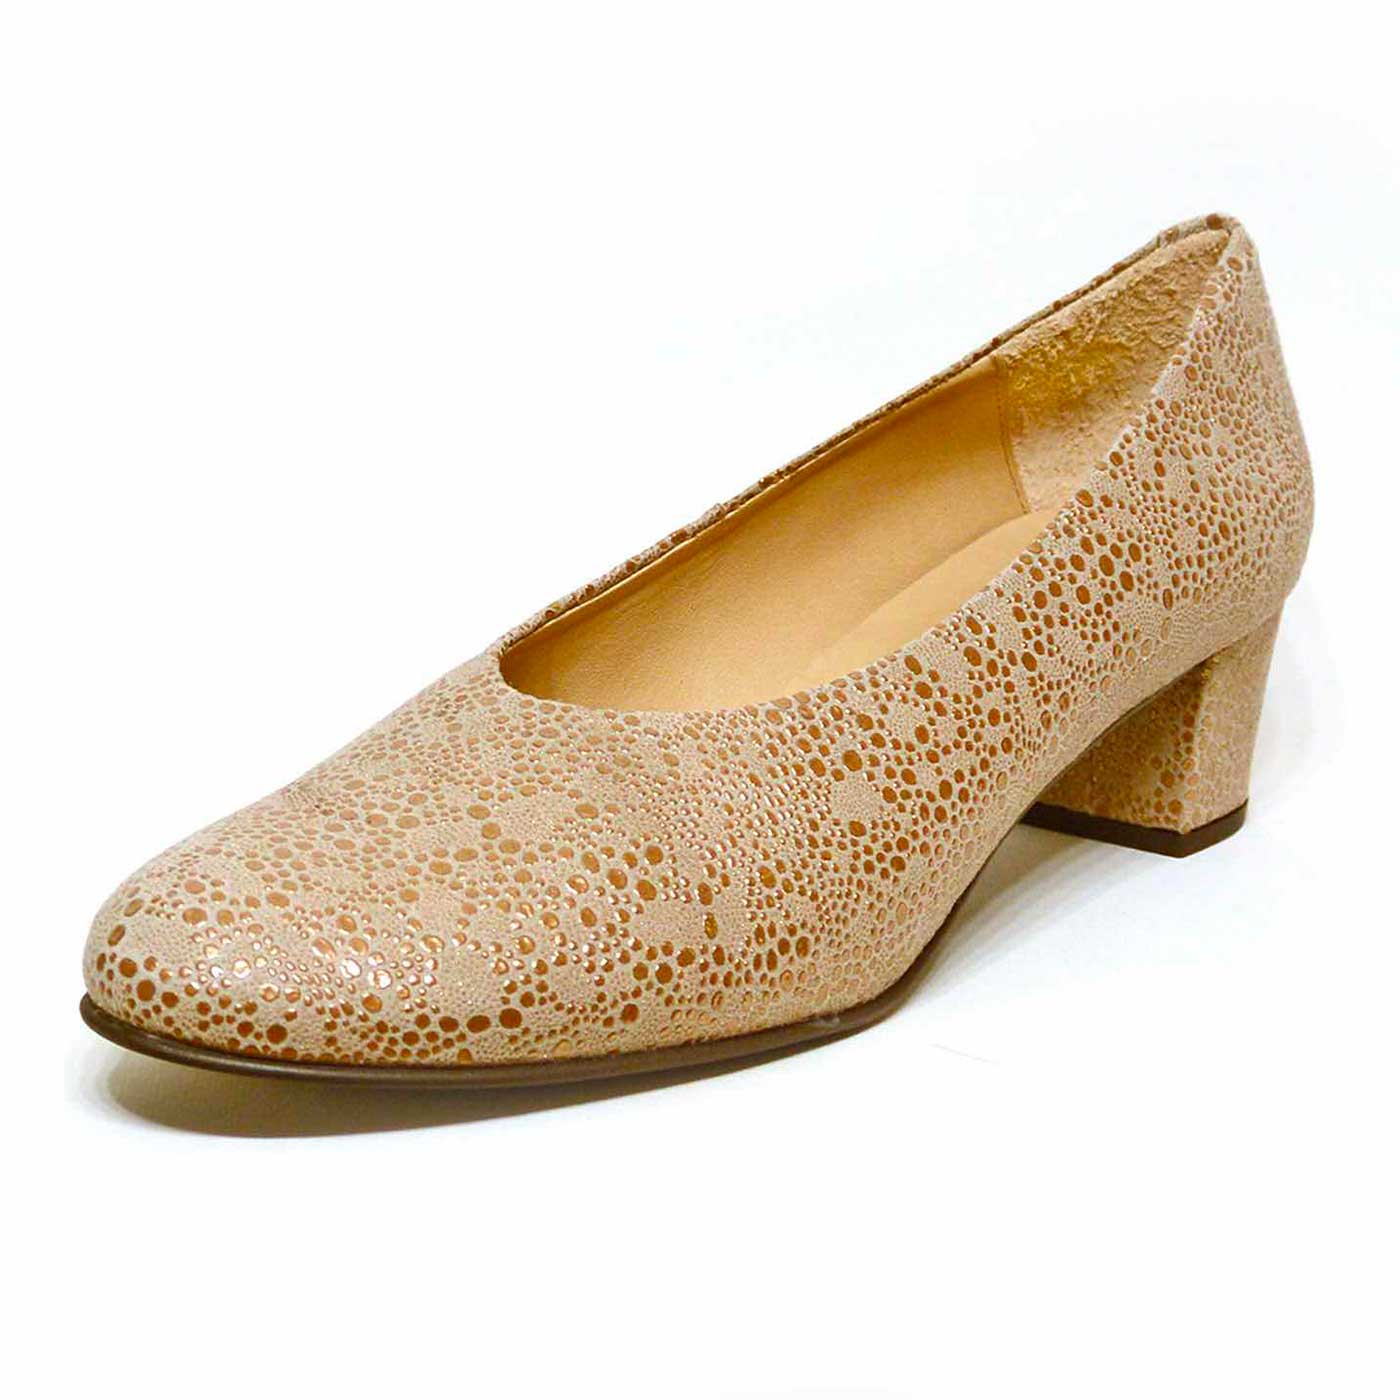 trotteurs cuir lisse beige or, chaussures femme grande taille